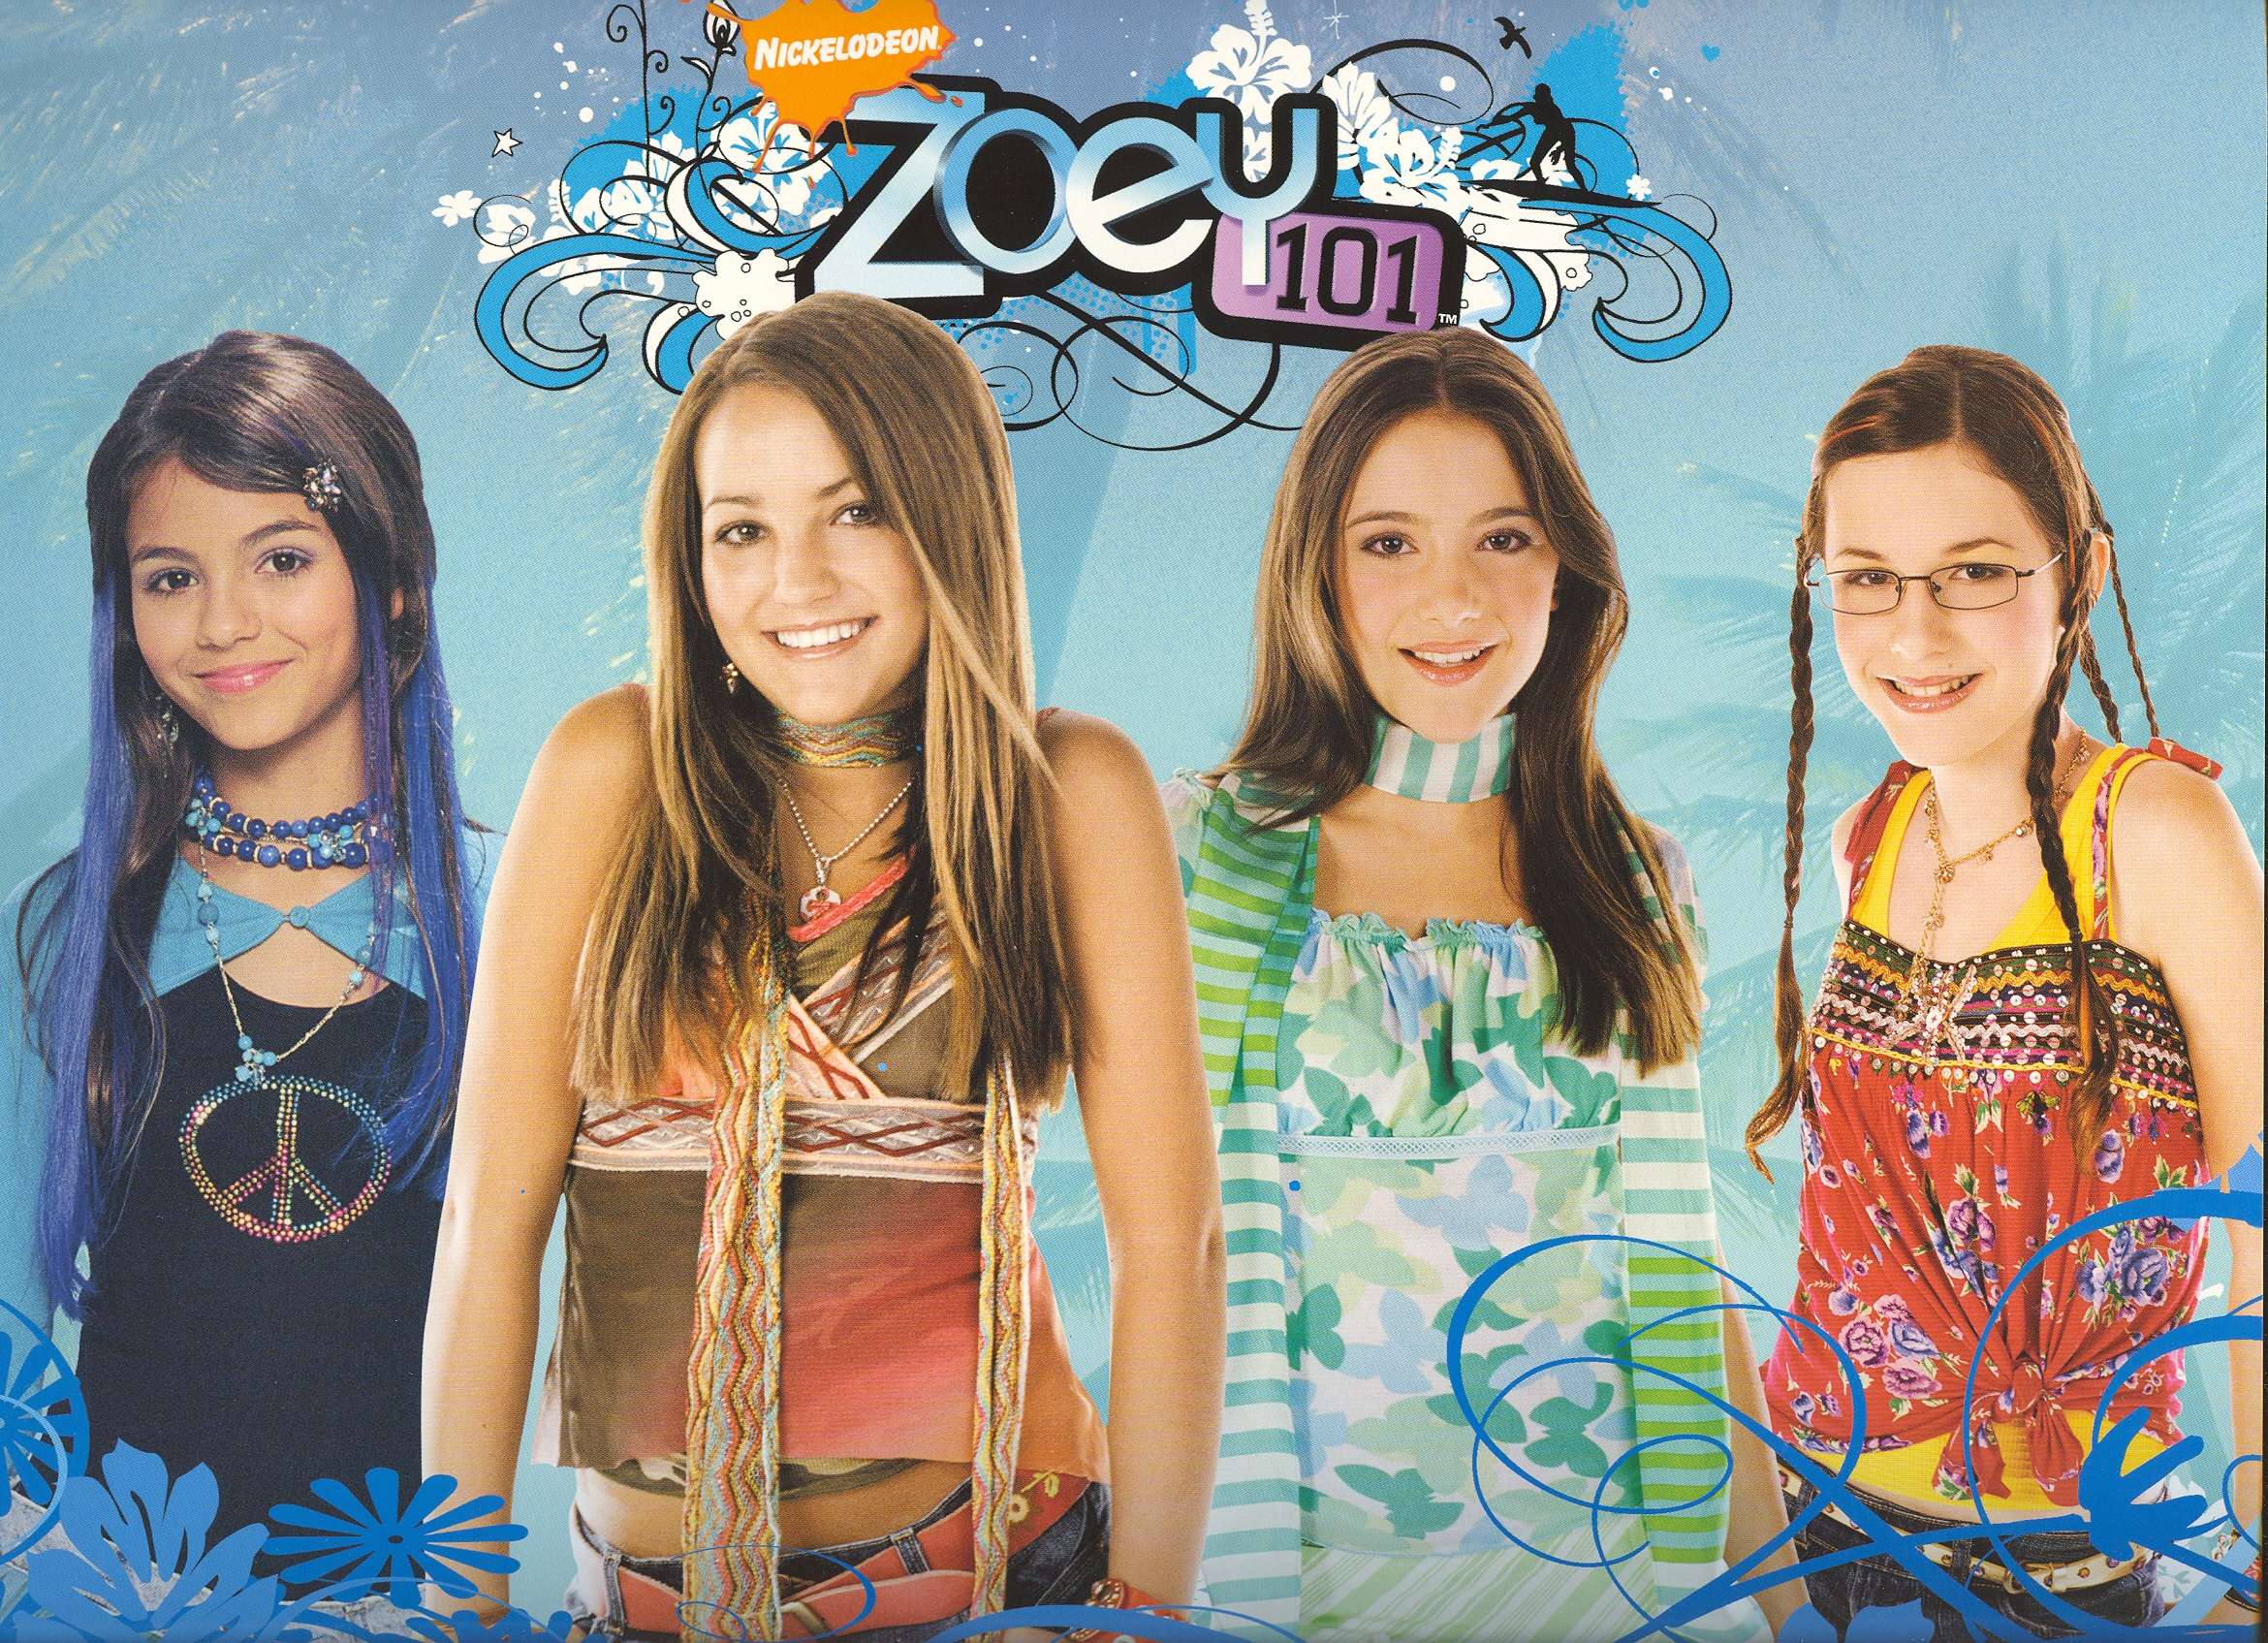 Zoey 101 Theme Song. Movie Theme Songs & TV Soundtracks